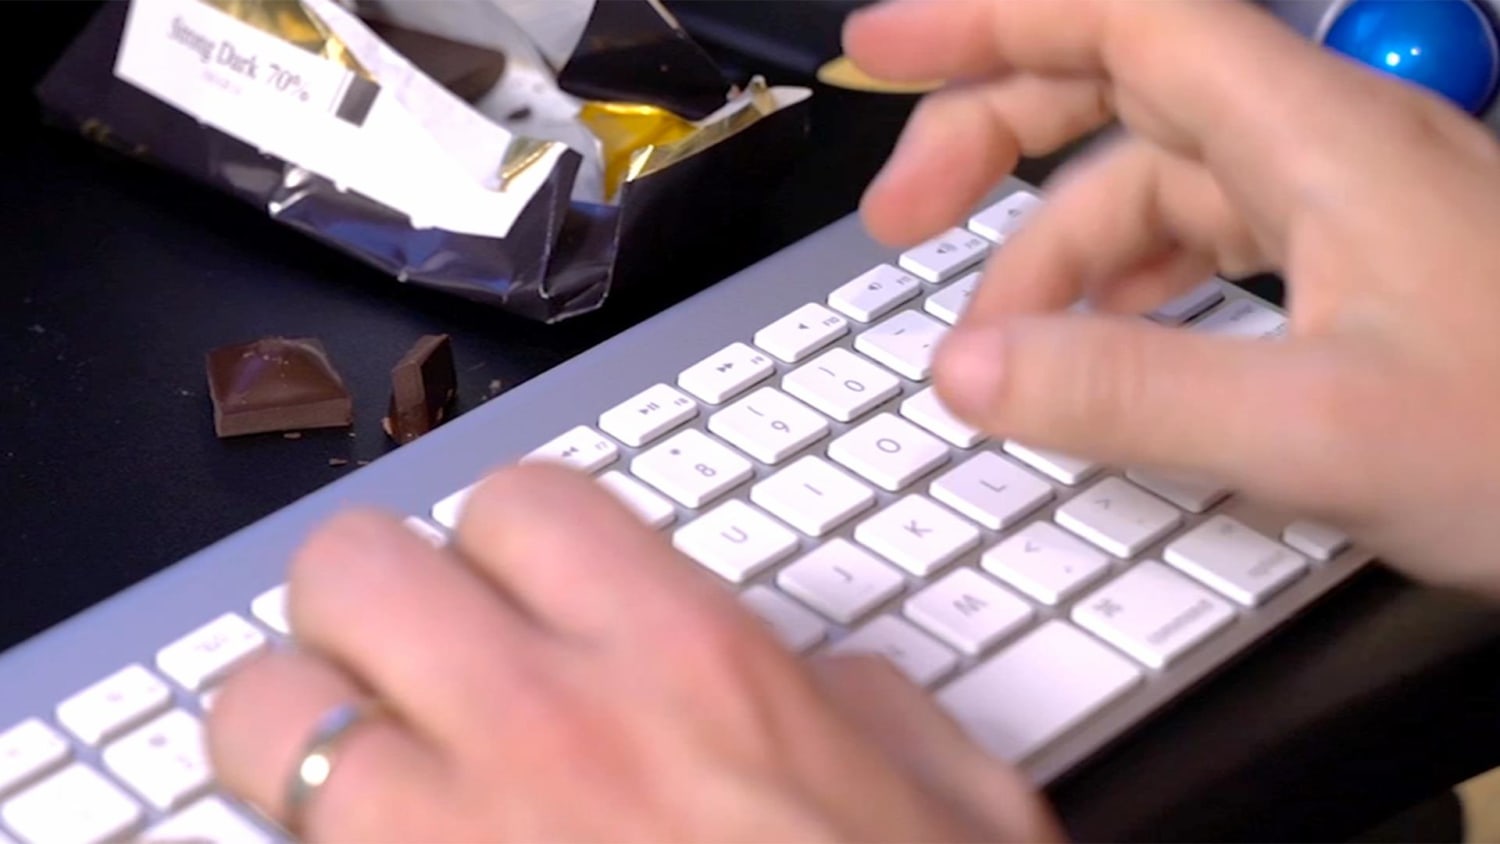 How to clean keyboard